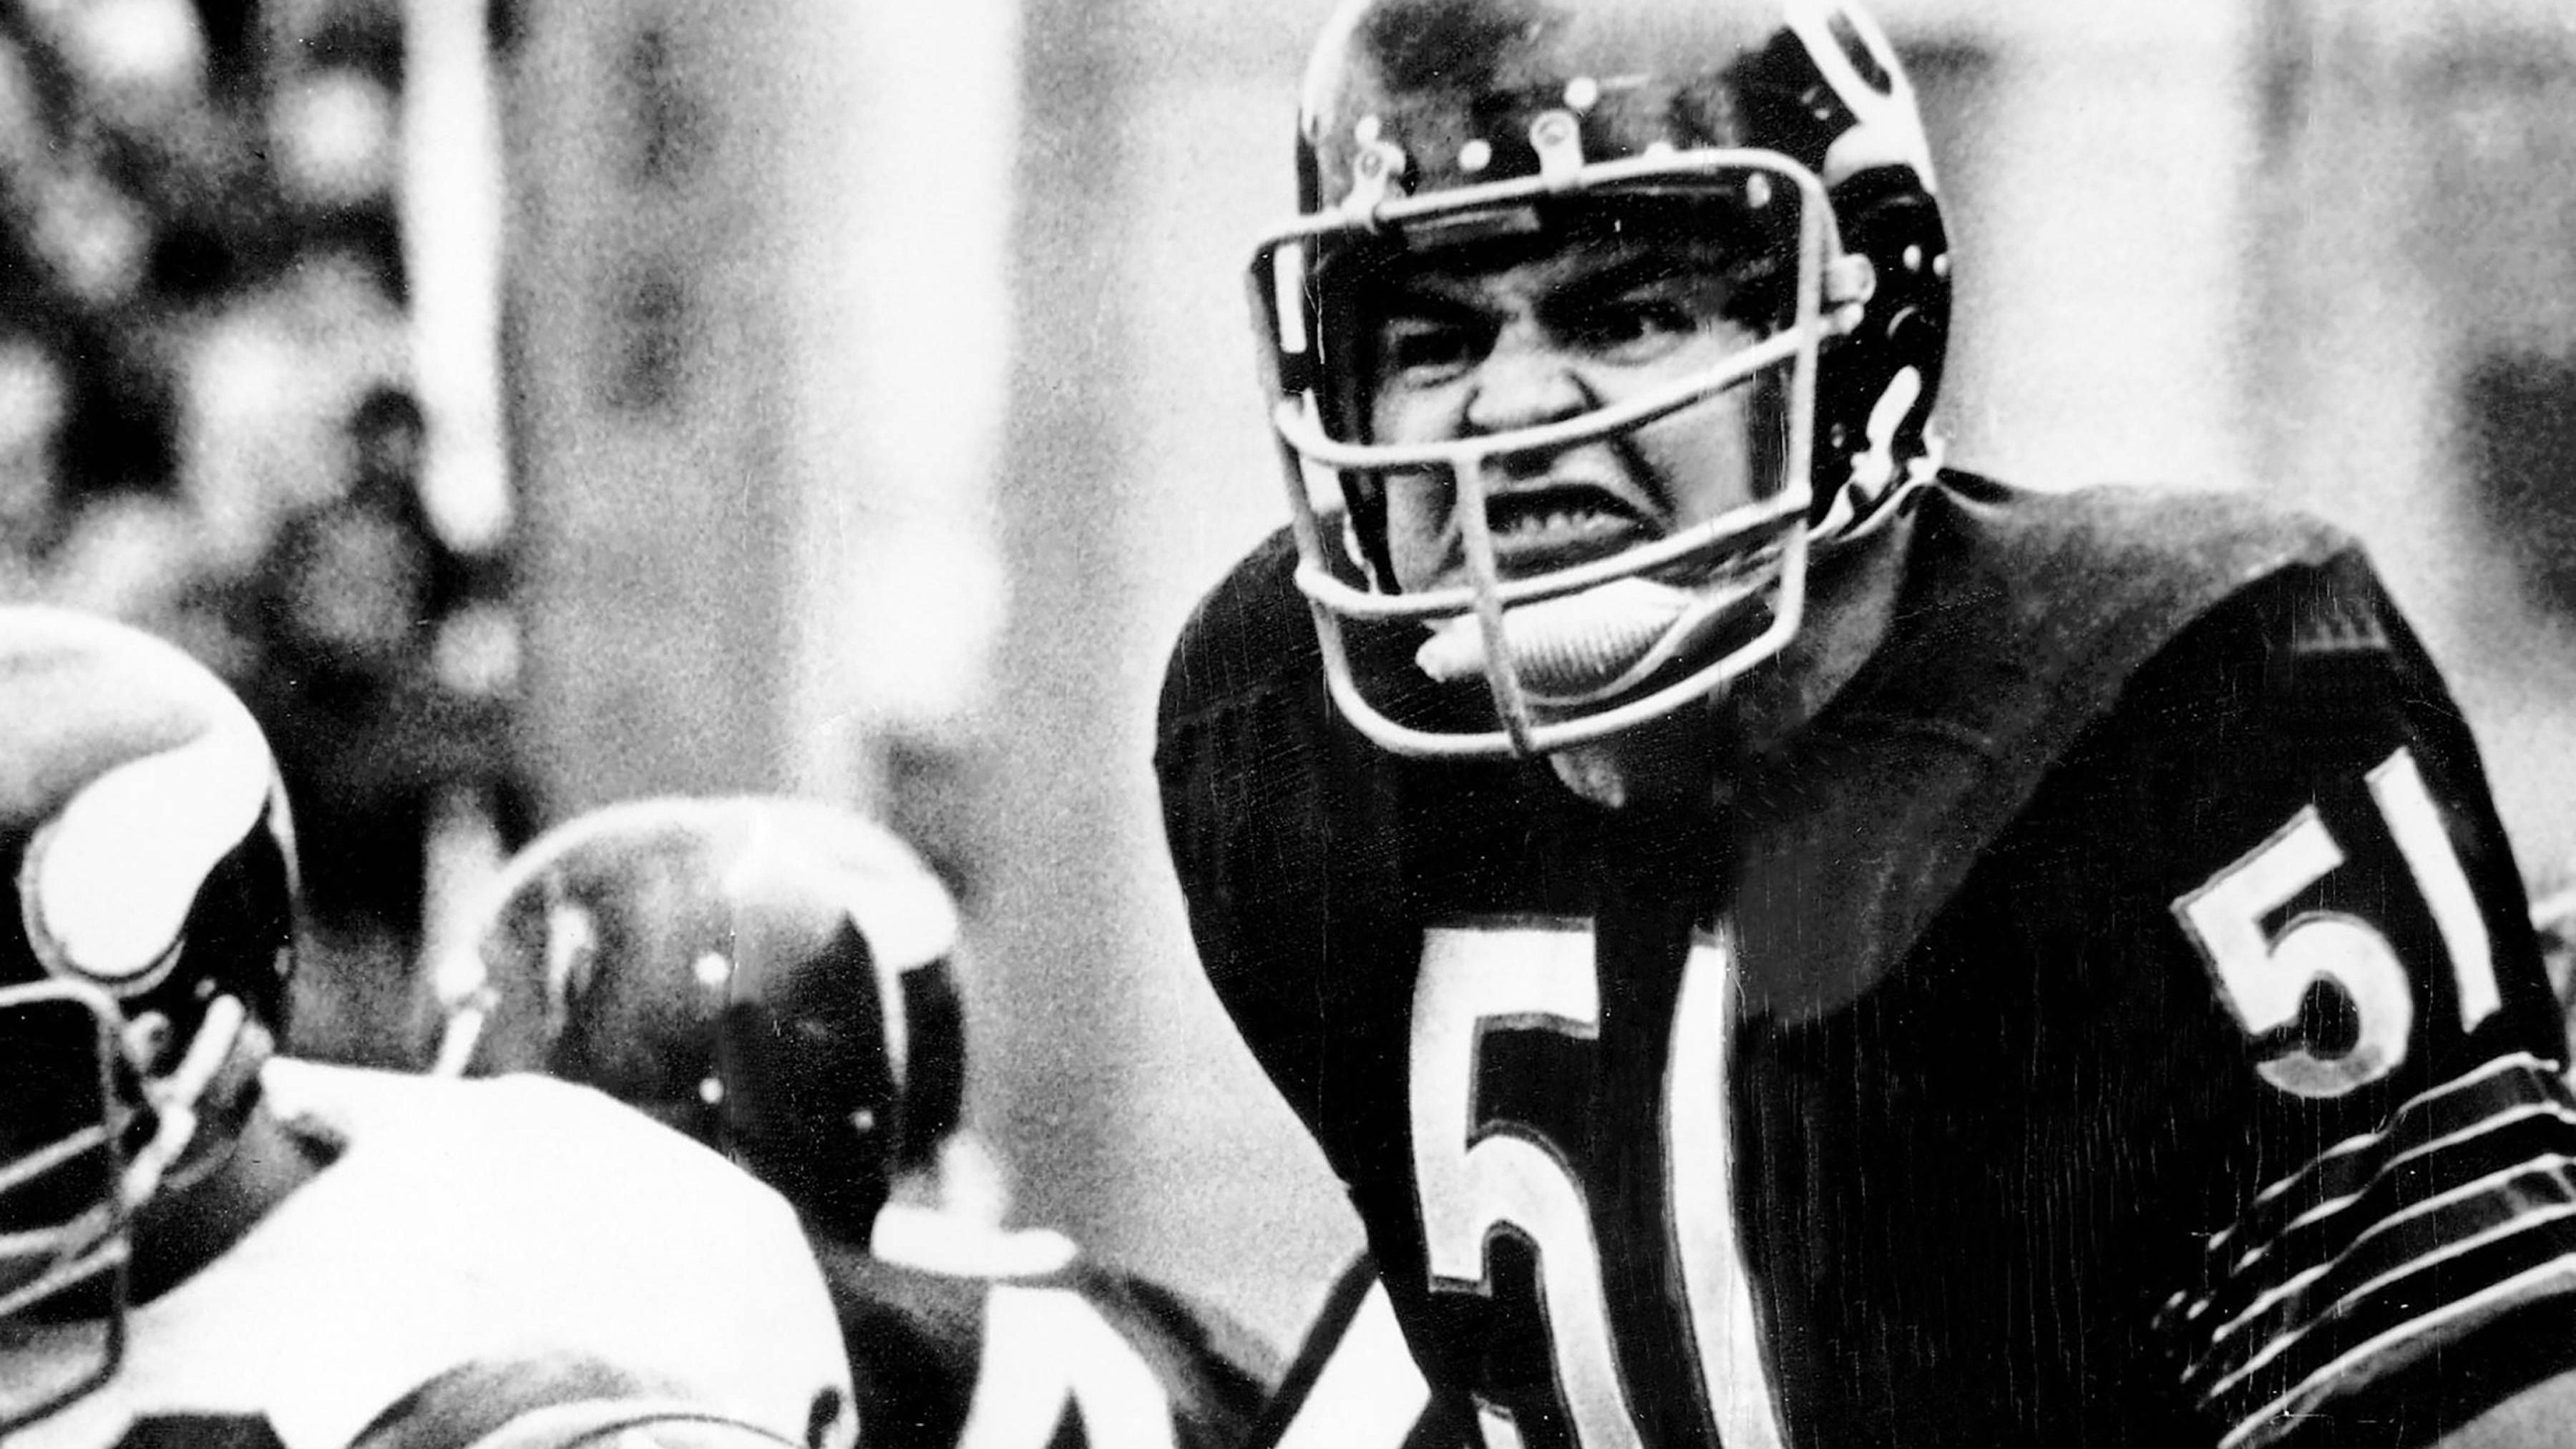 <strong>51: Dick Butkus</strong><br>Team: Chicago Bears<br>Position: Linebacker<br>Erfolge: Pro Football Hall of Famer, fünfmaliger First Team All-Pro, achtmaliger Pro Bowler<br>Honorable Mentions: Sam Mills, Randy Cross